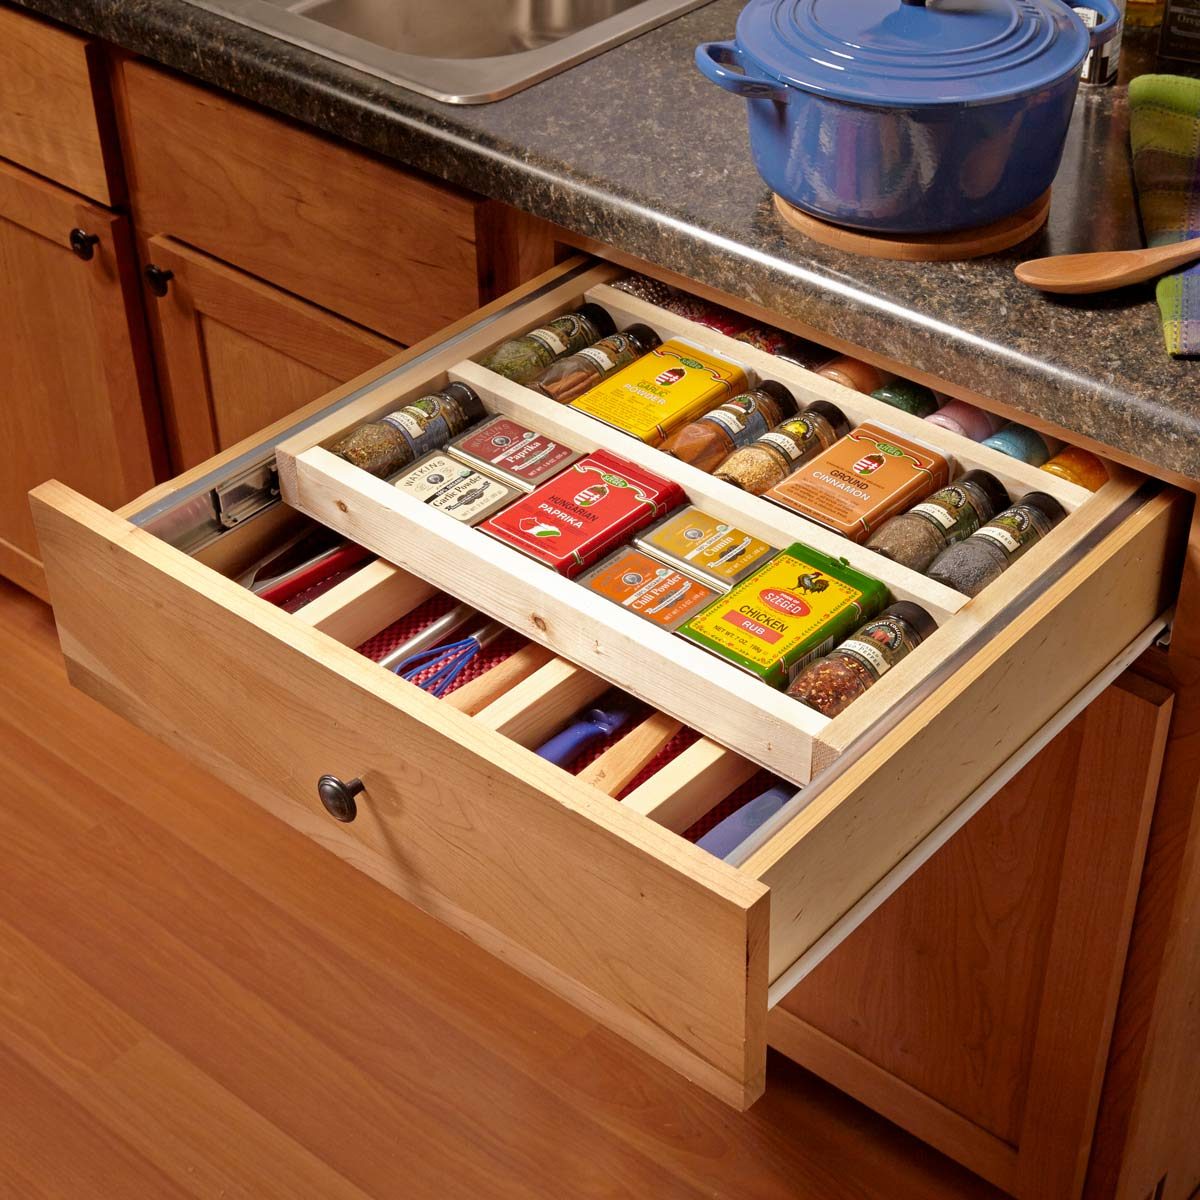 12 Spice Rack Ideas for Better Kitchen Storage The Family Handyman